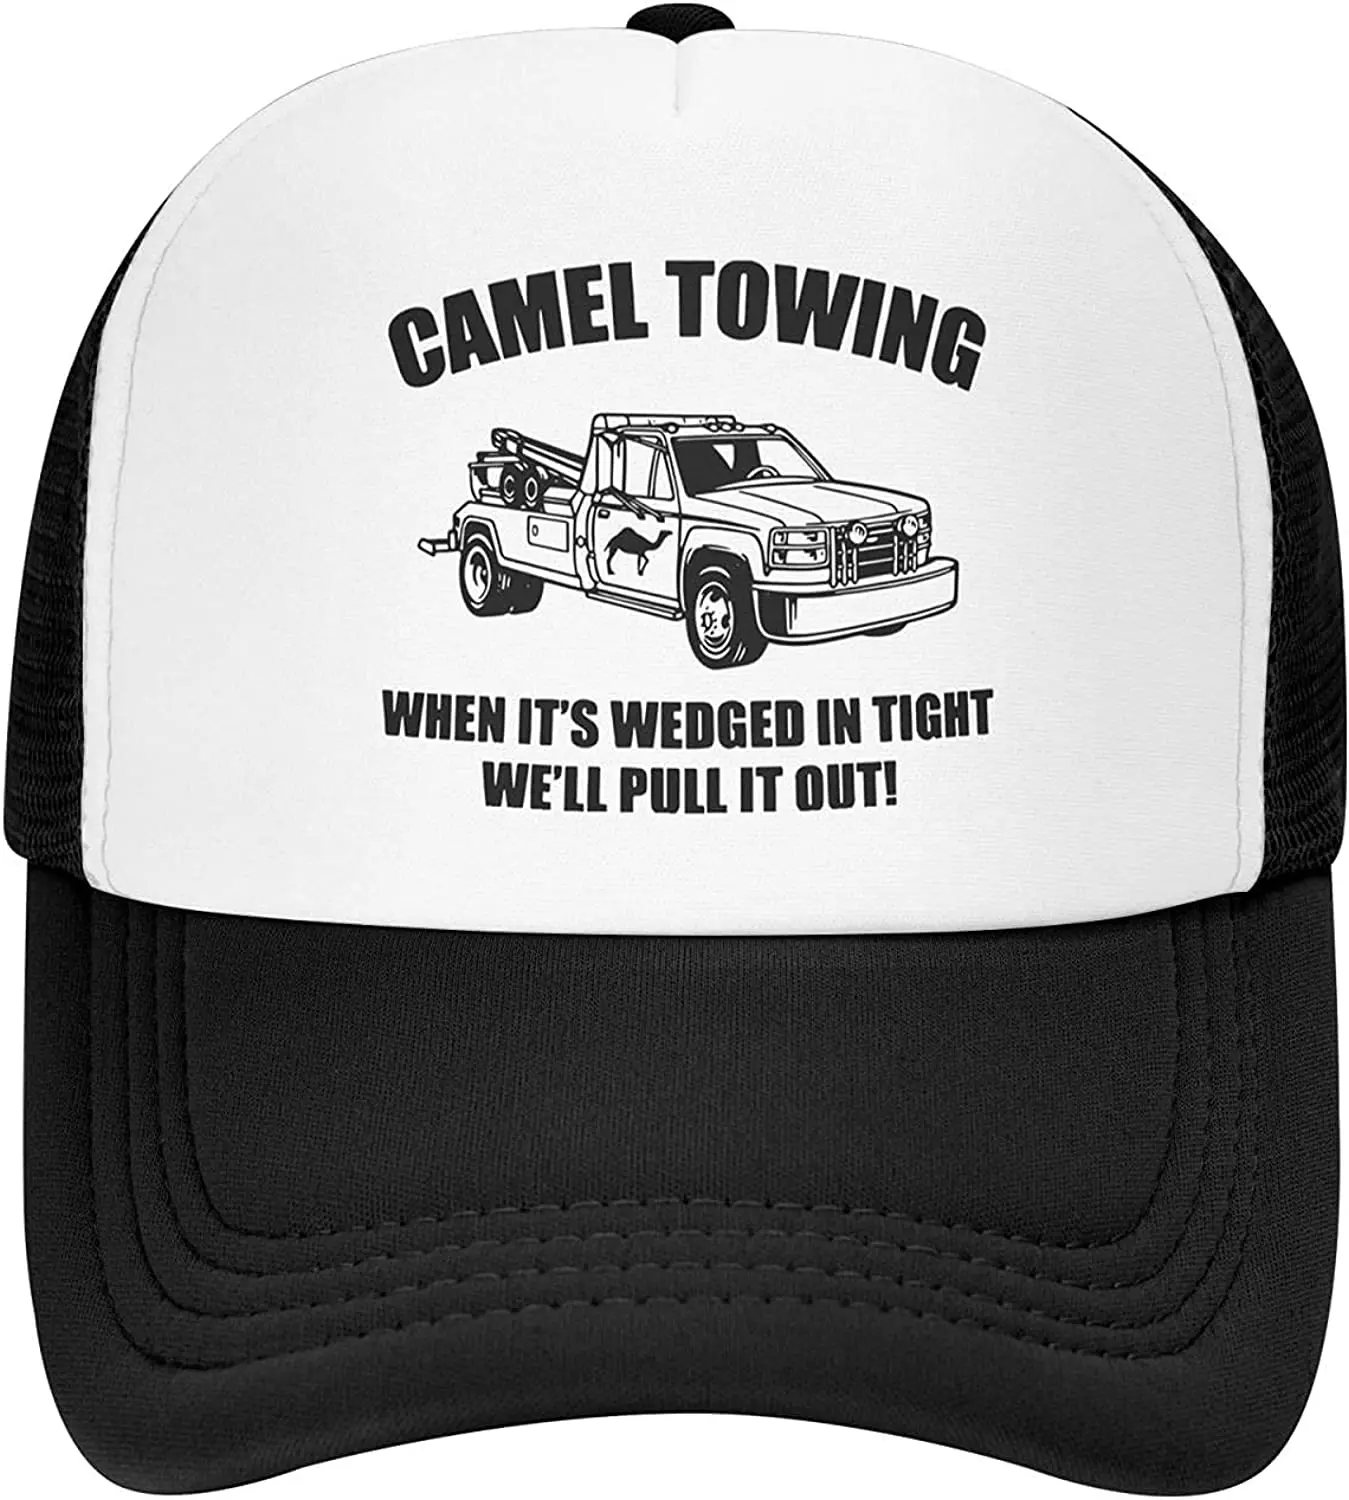 Able camel towing youth adjustable mesh hat trucker cap baseball hats for men and women thumb200